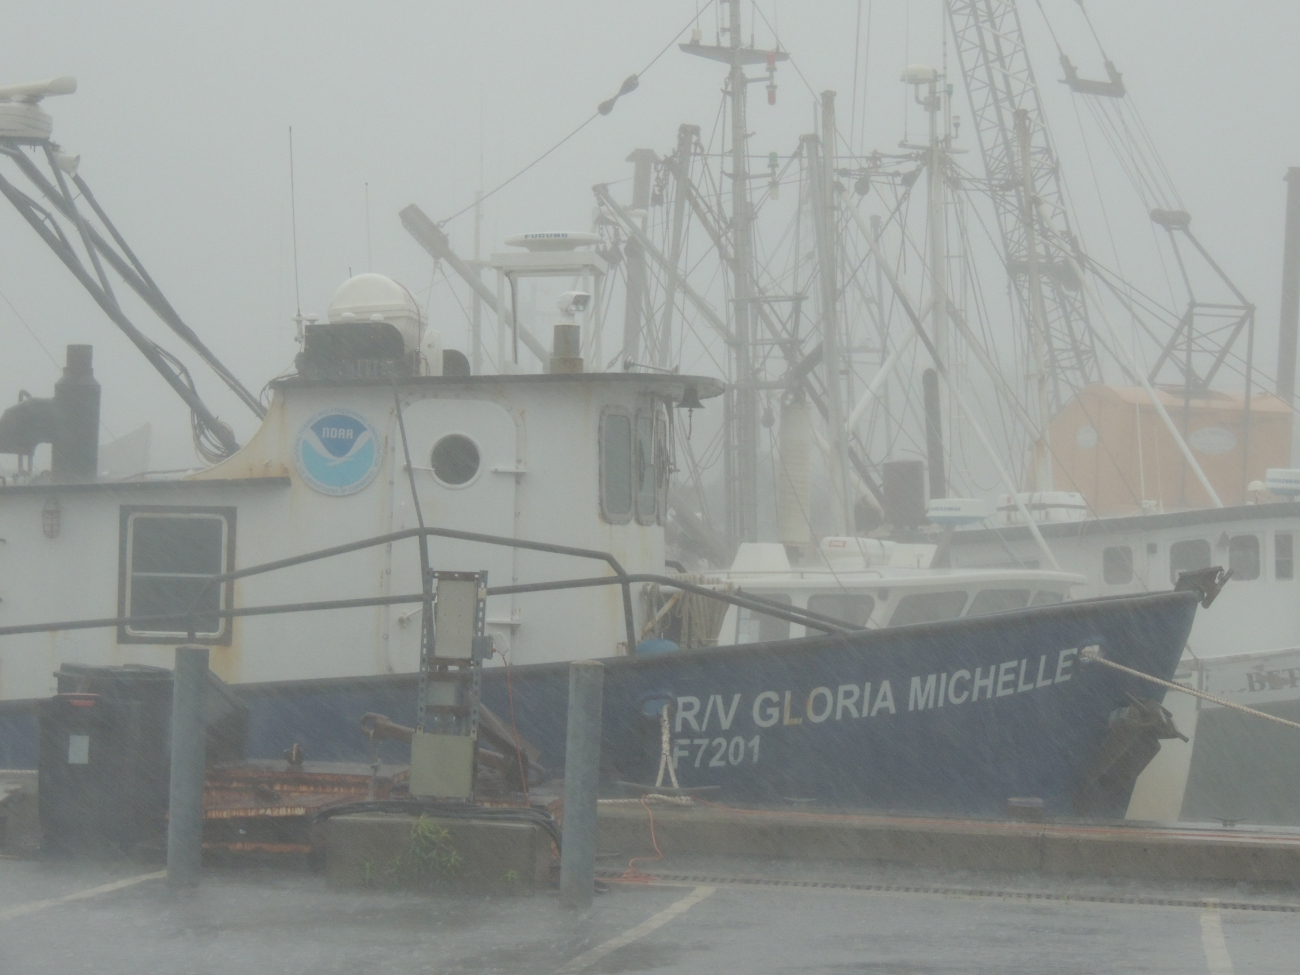 The NOAA R/V GLORIA MICHELLE tied up at Woods Hole on a foggy morning